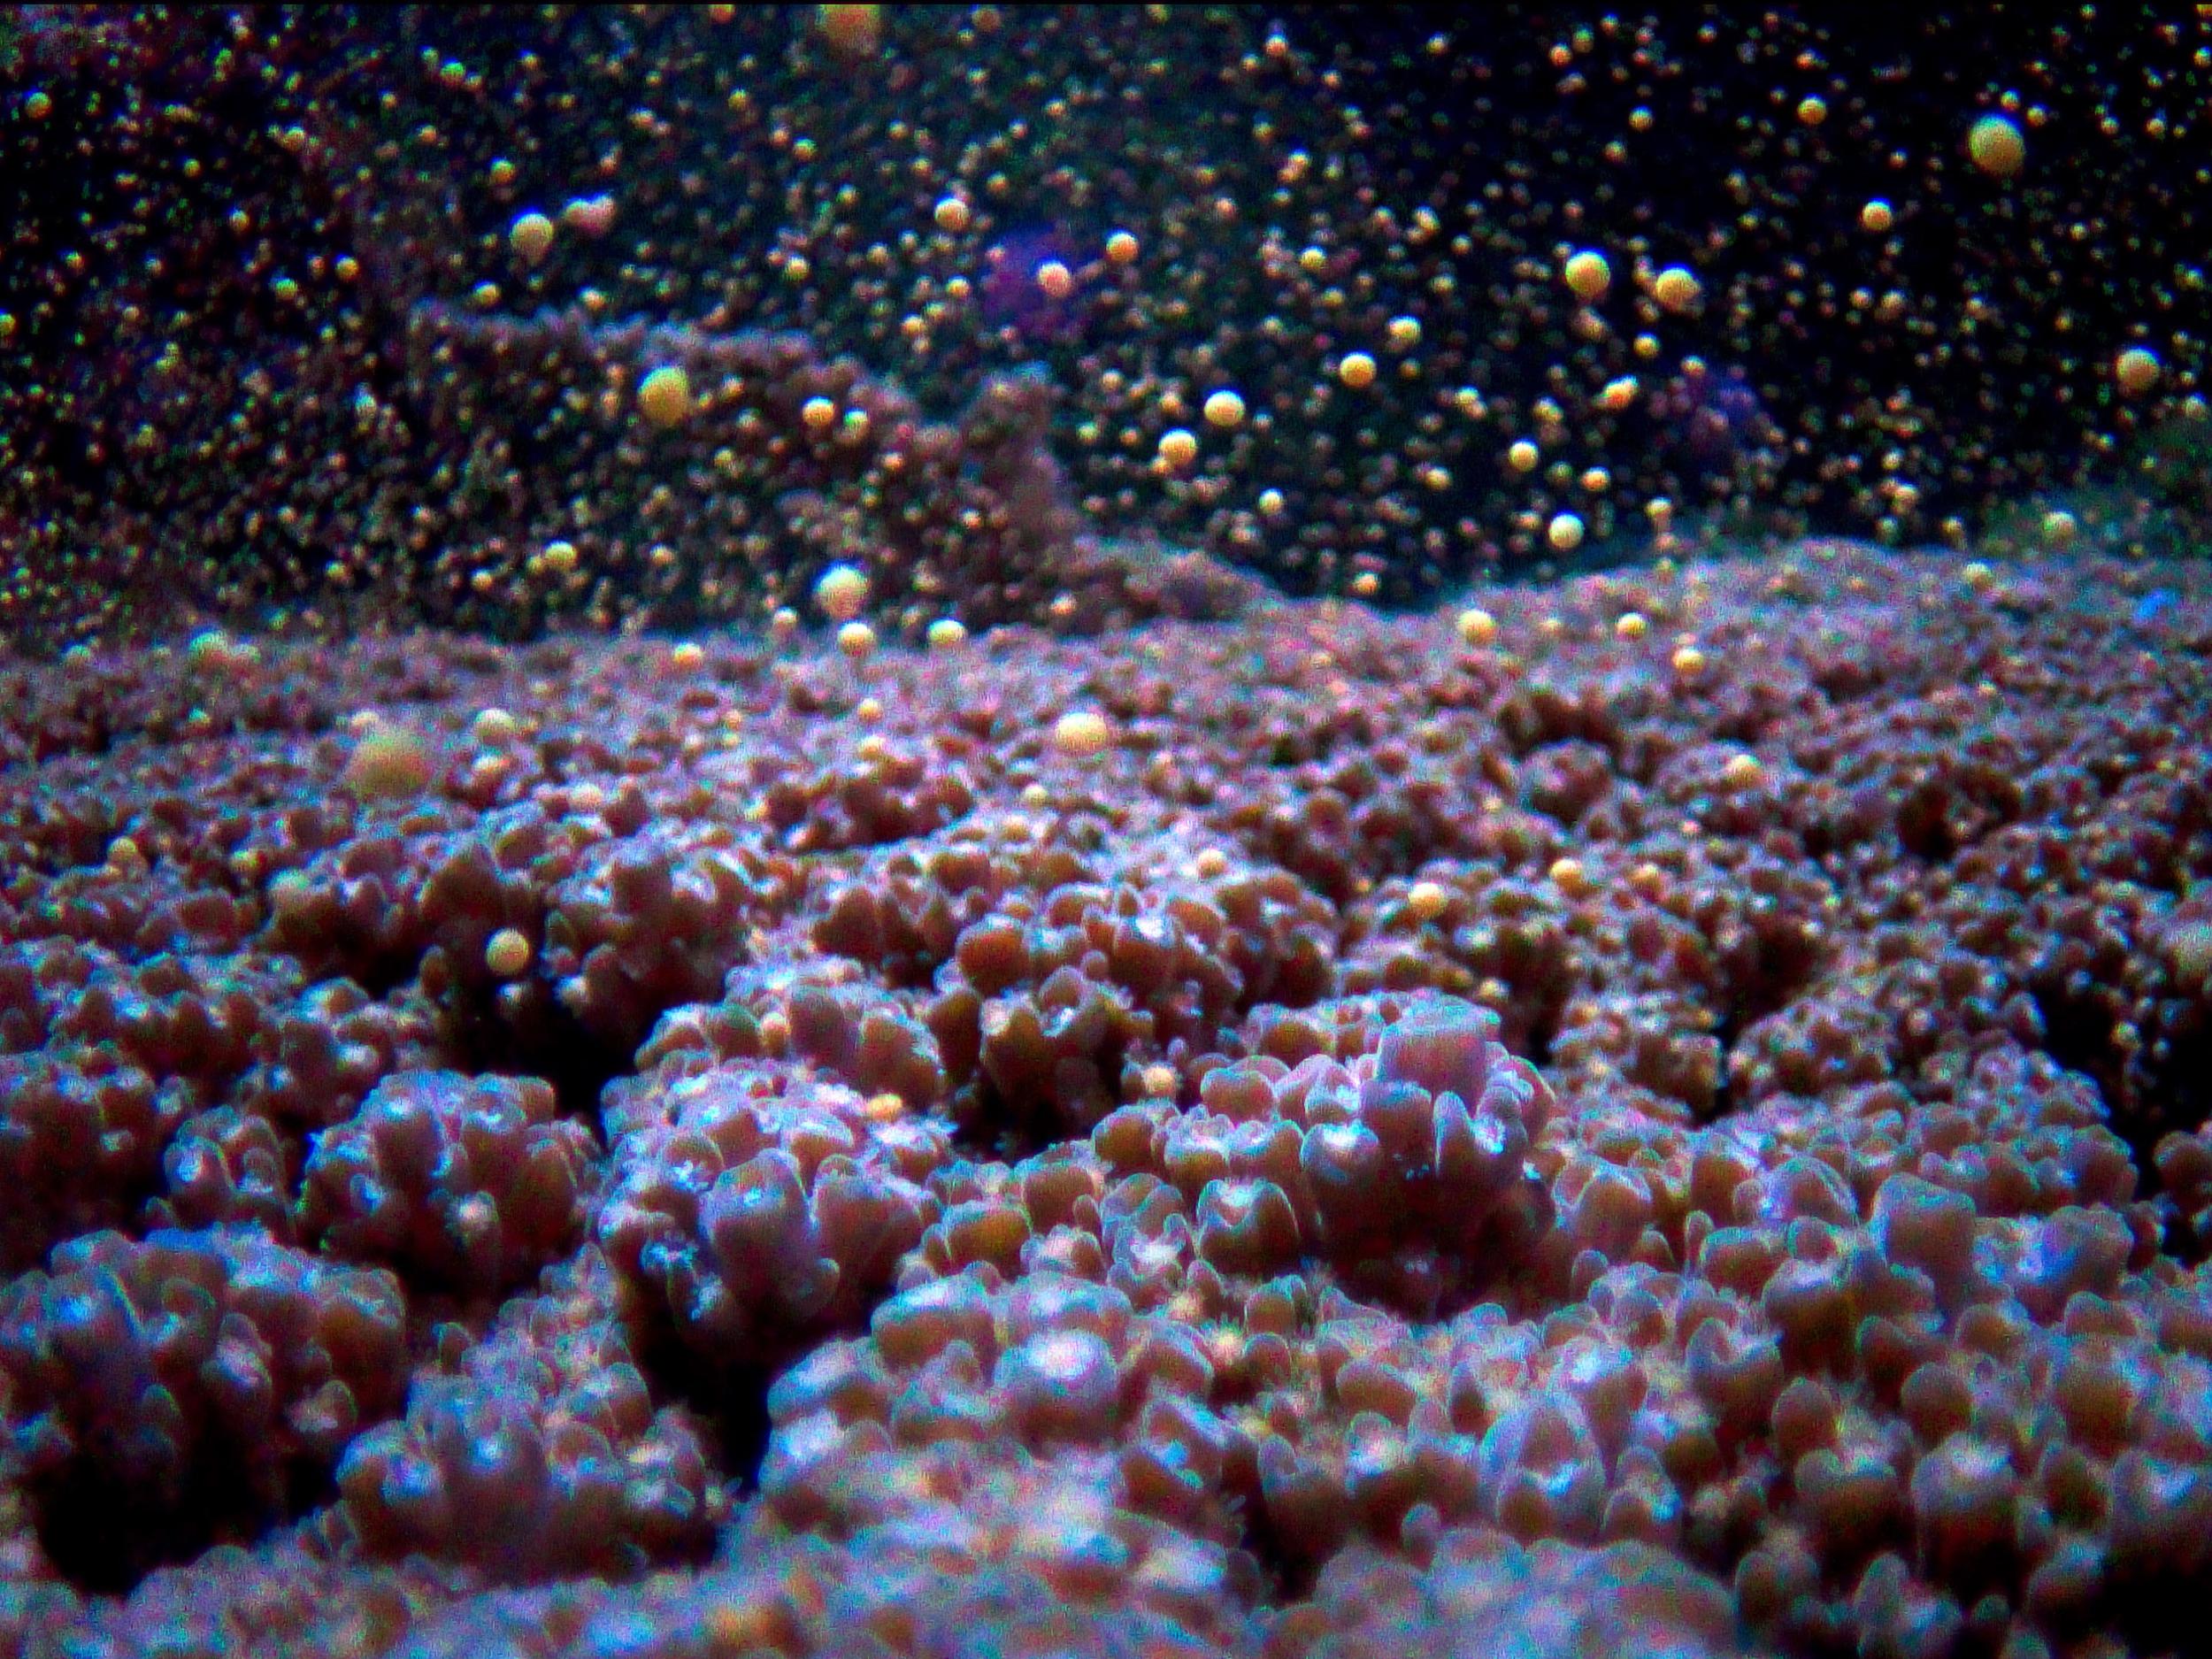 Coral spawning on the Great Barrier Reef, Australia